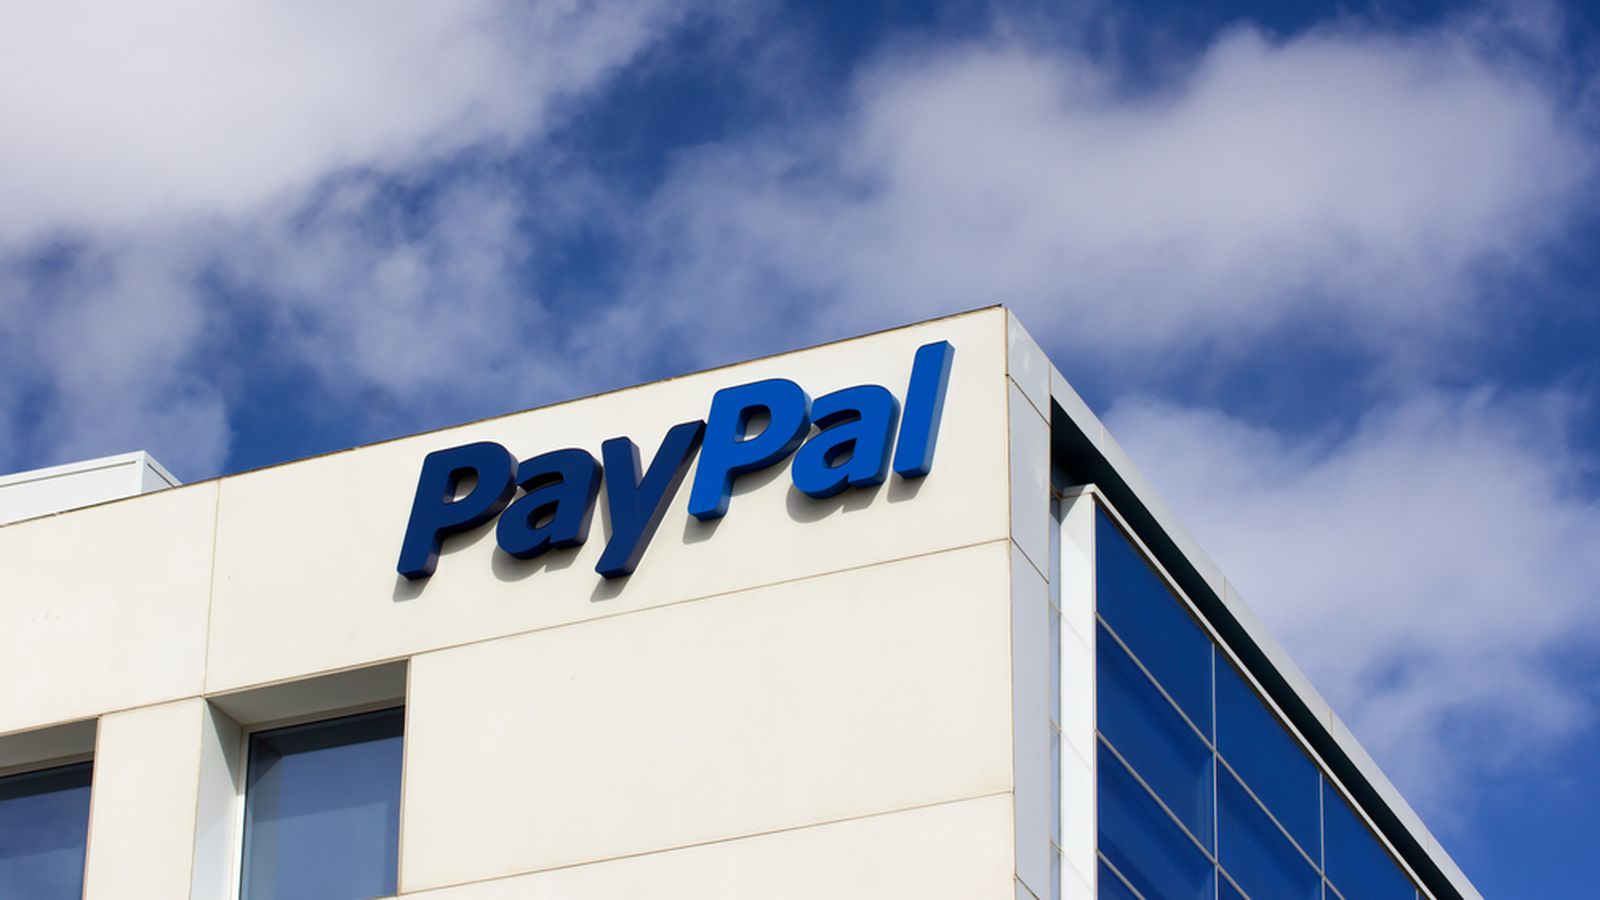 PayPal to Pay $25 Million Over Credit Product Deception - Recode
